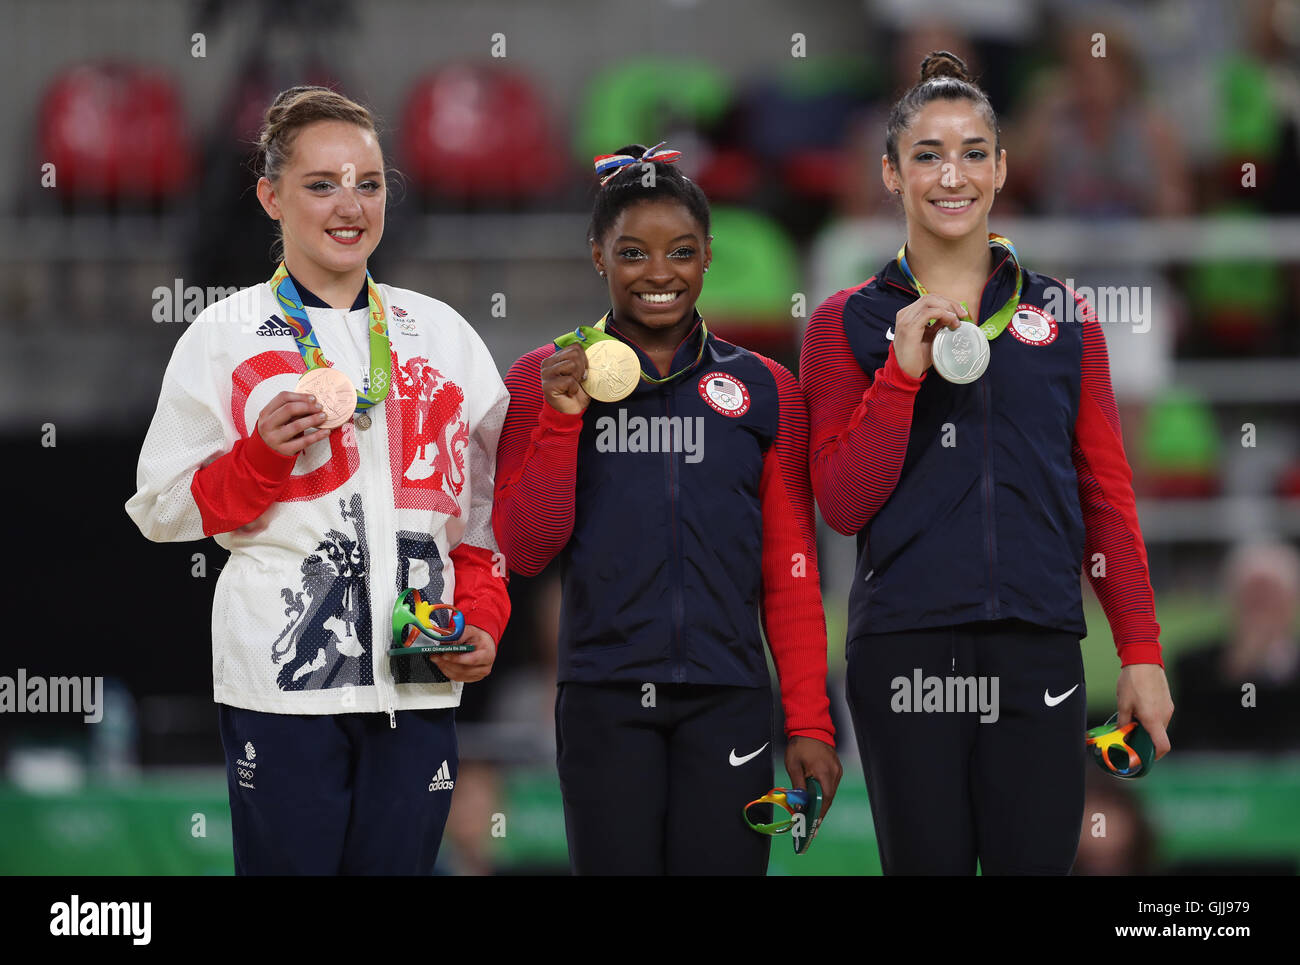 Great Britain's Amy Tinkler celebrates a bronze meda with Gold medalist Simone Biles and silver medalist Aly Raisman (right)l in the Women's Floor Exercise final at the Rio Olympic Arena on the eleventh day of the Rio Olympics Games, Brazil. Stock Photo